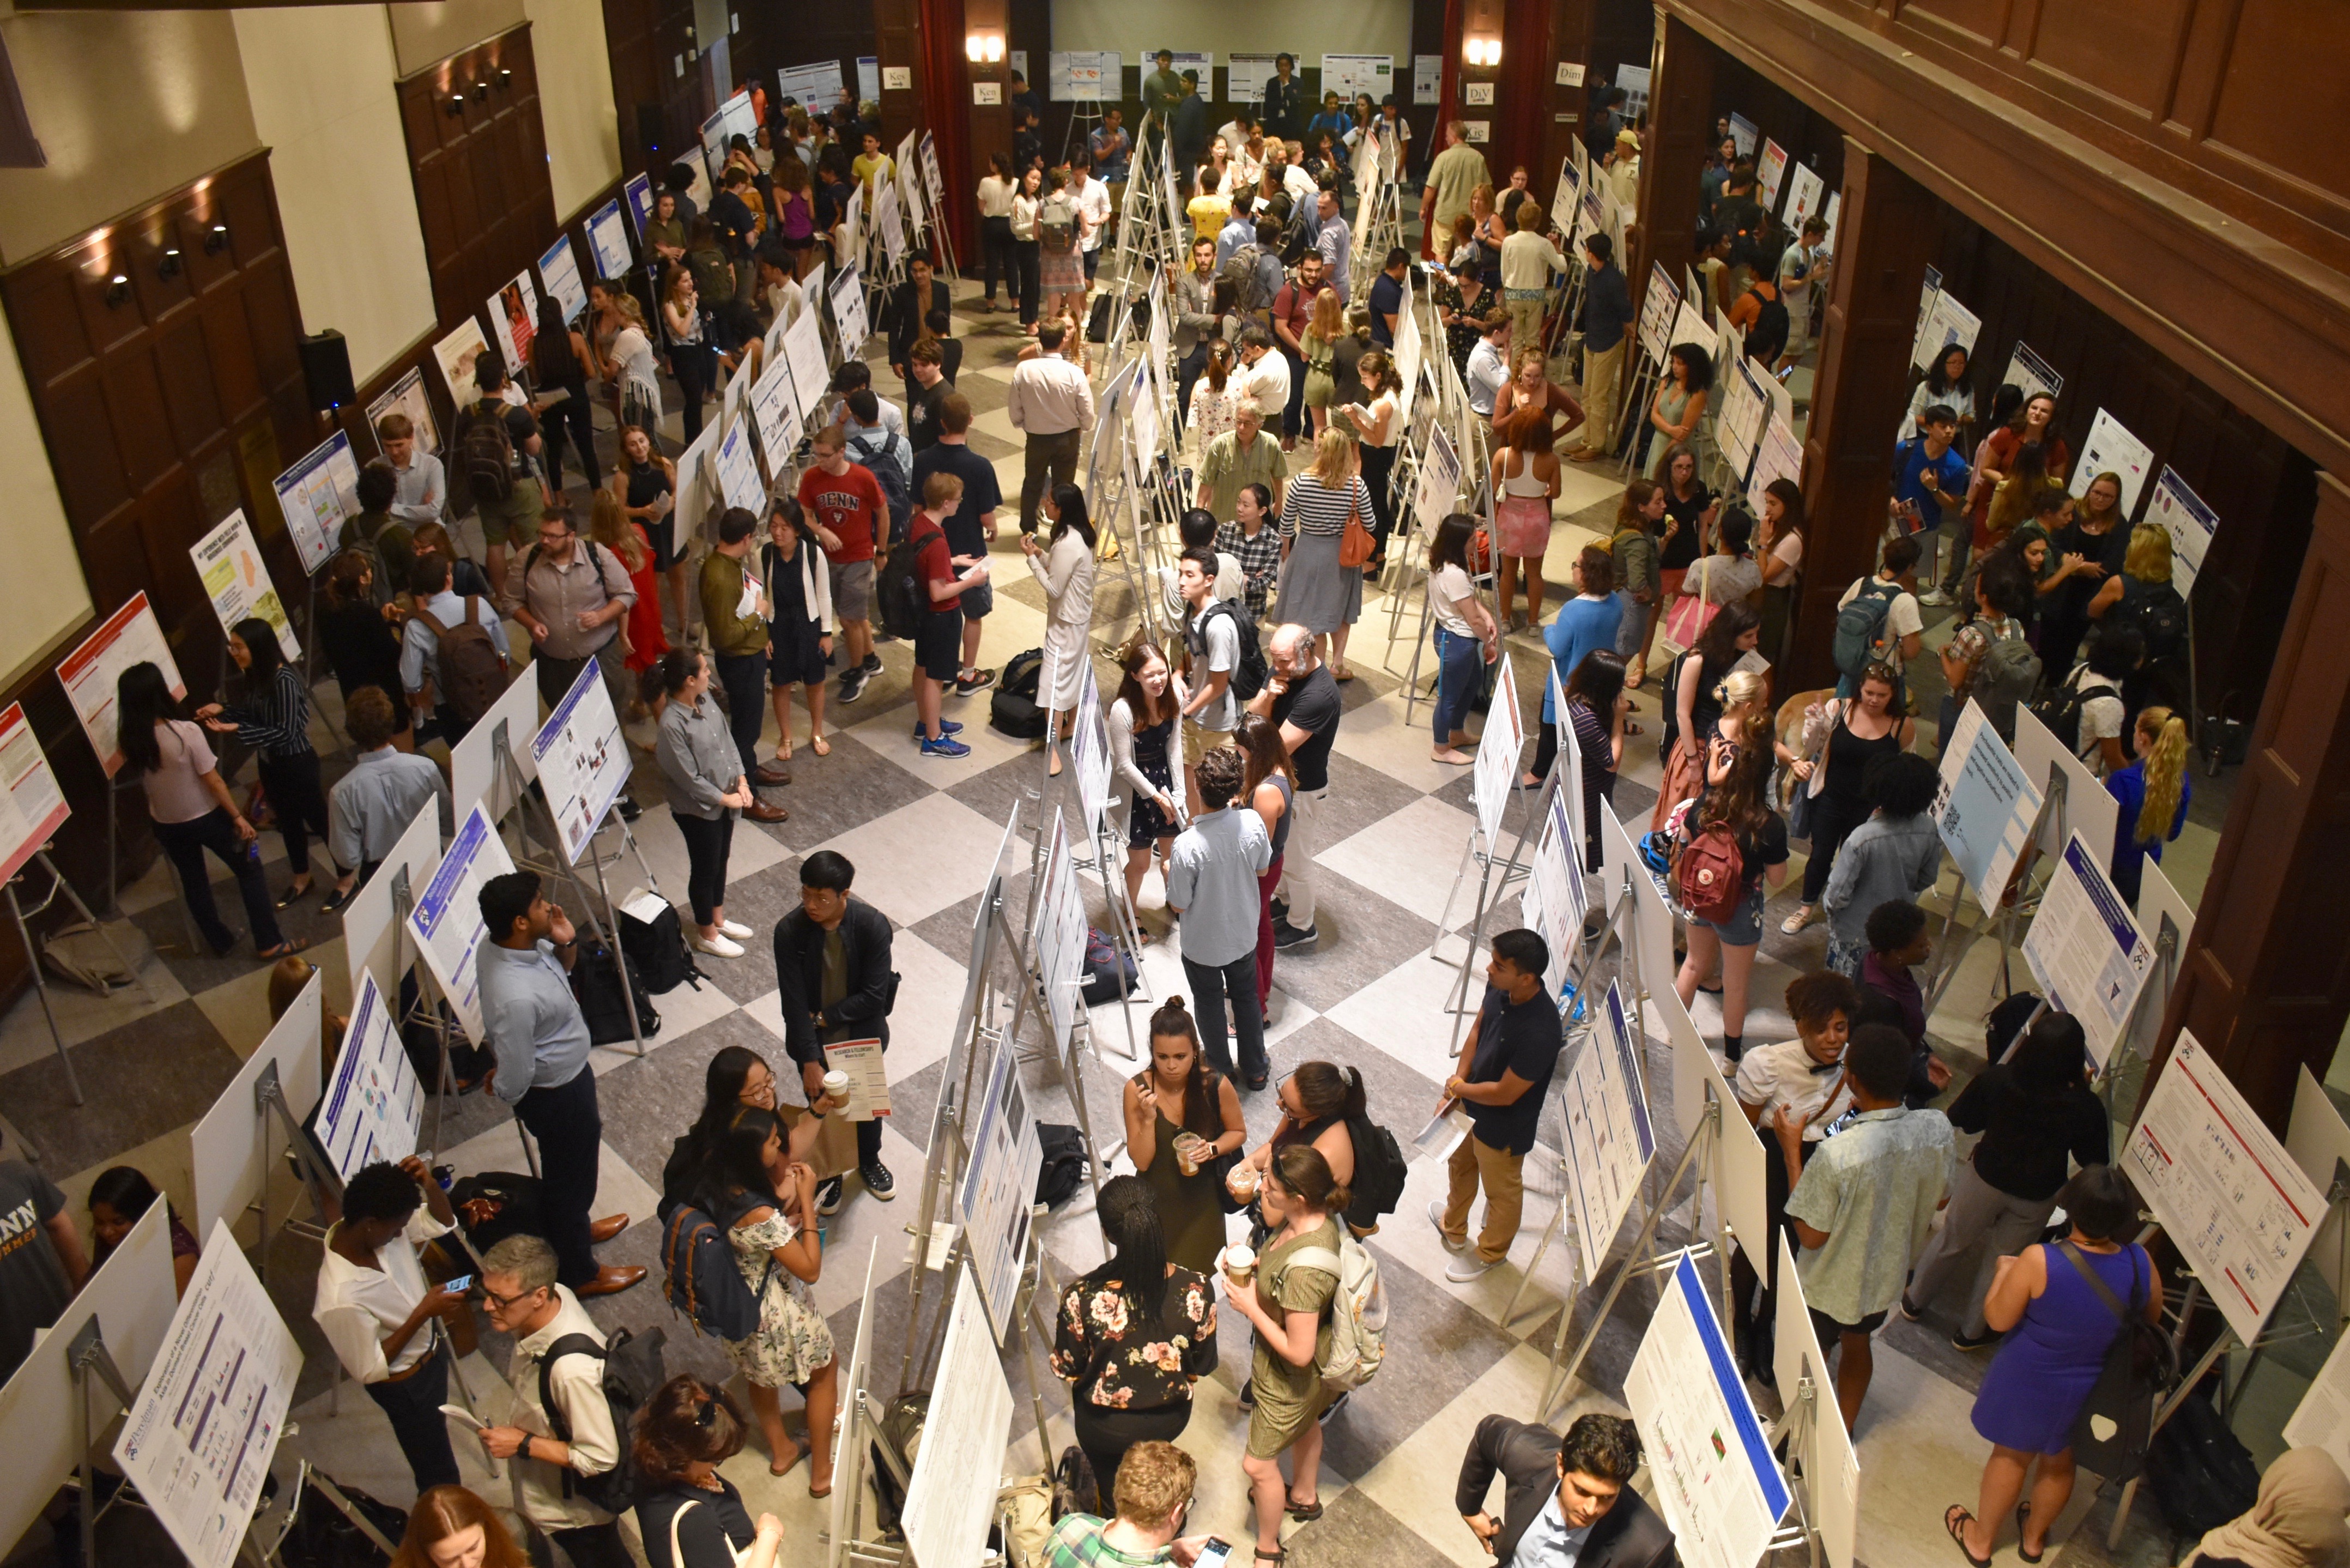 Aerial view of hallway filled with CURF poster displays and students